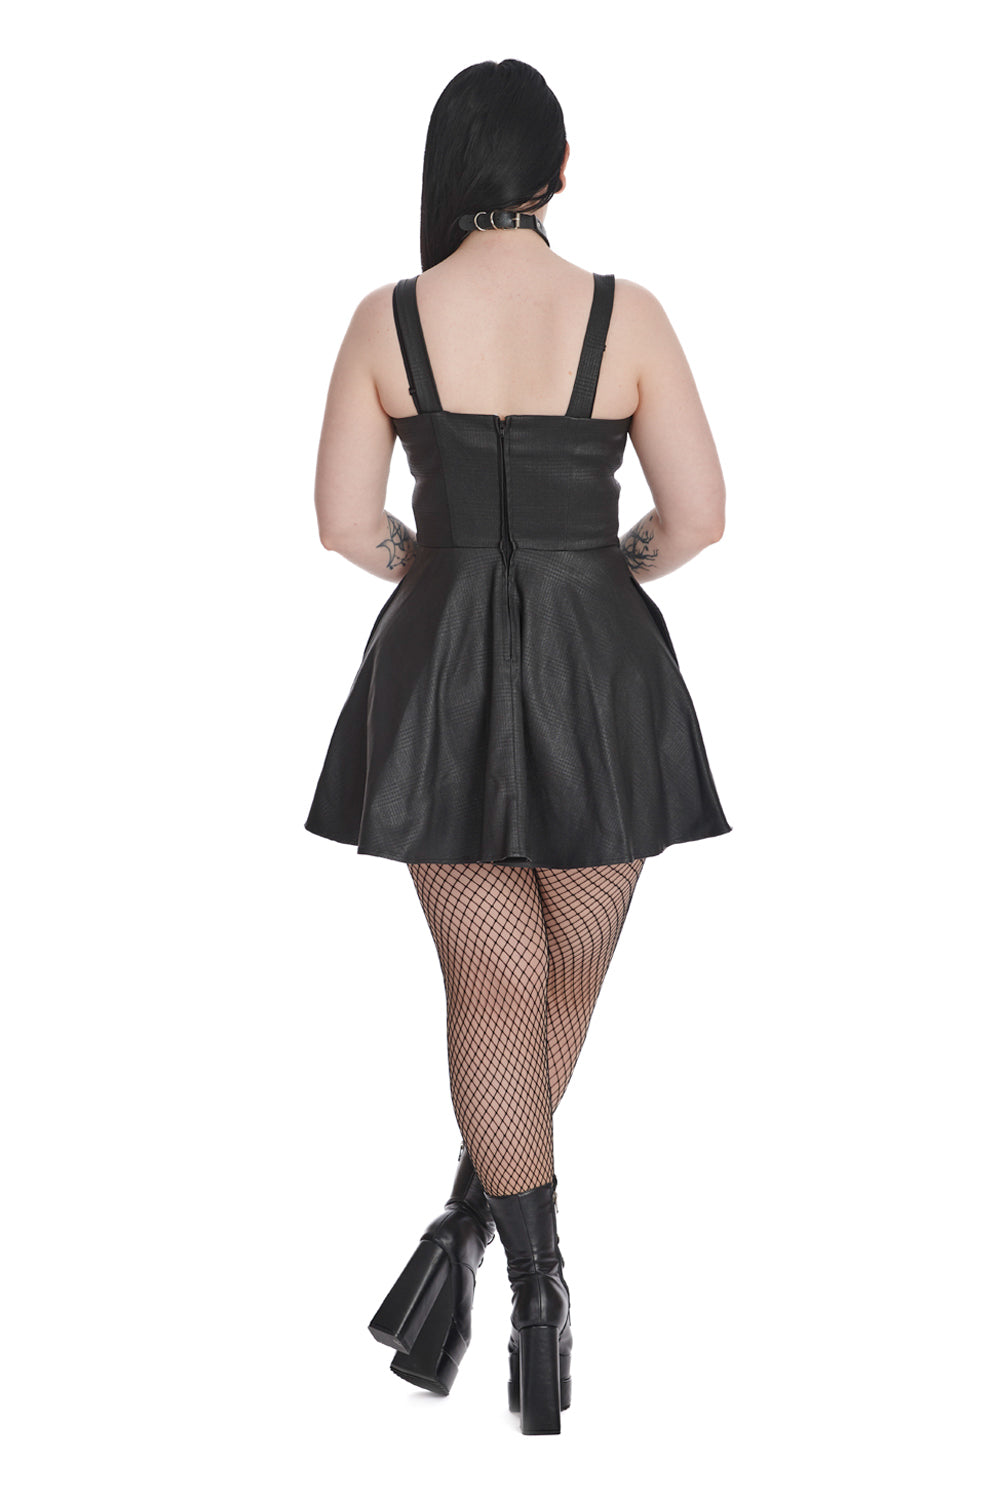 Banned Chaos Couture Dress - Kate's Clothing